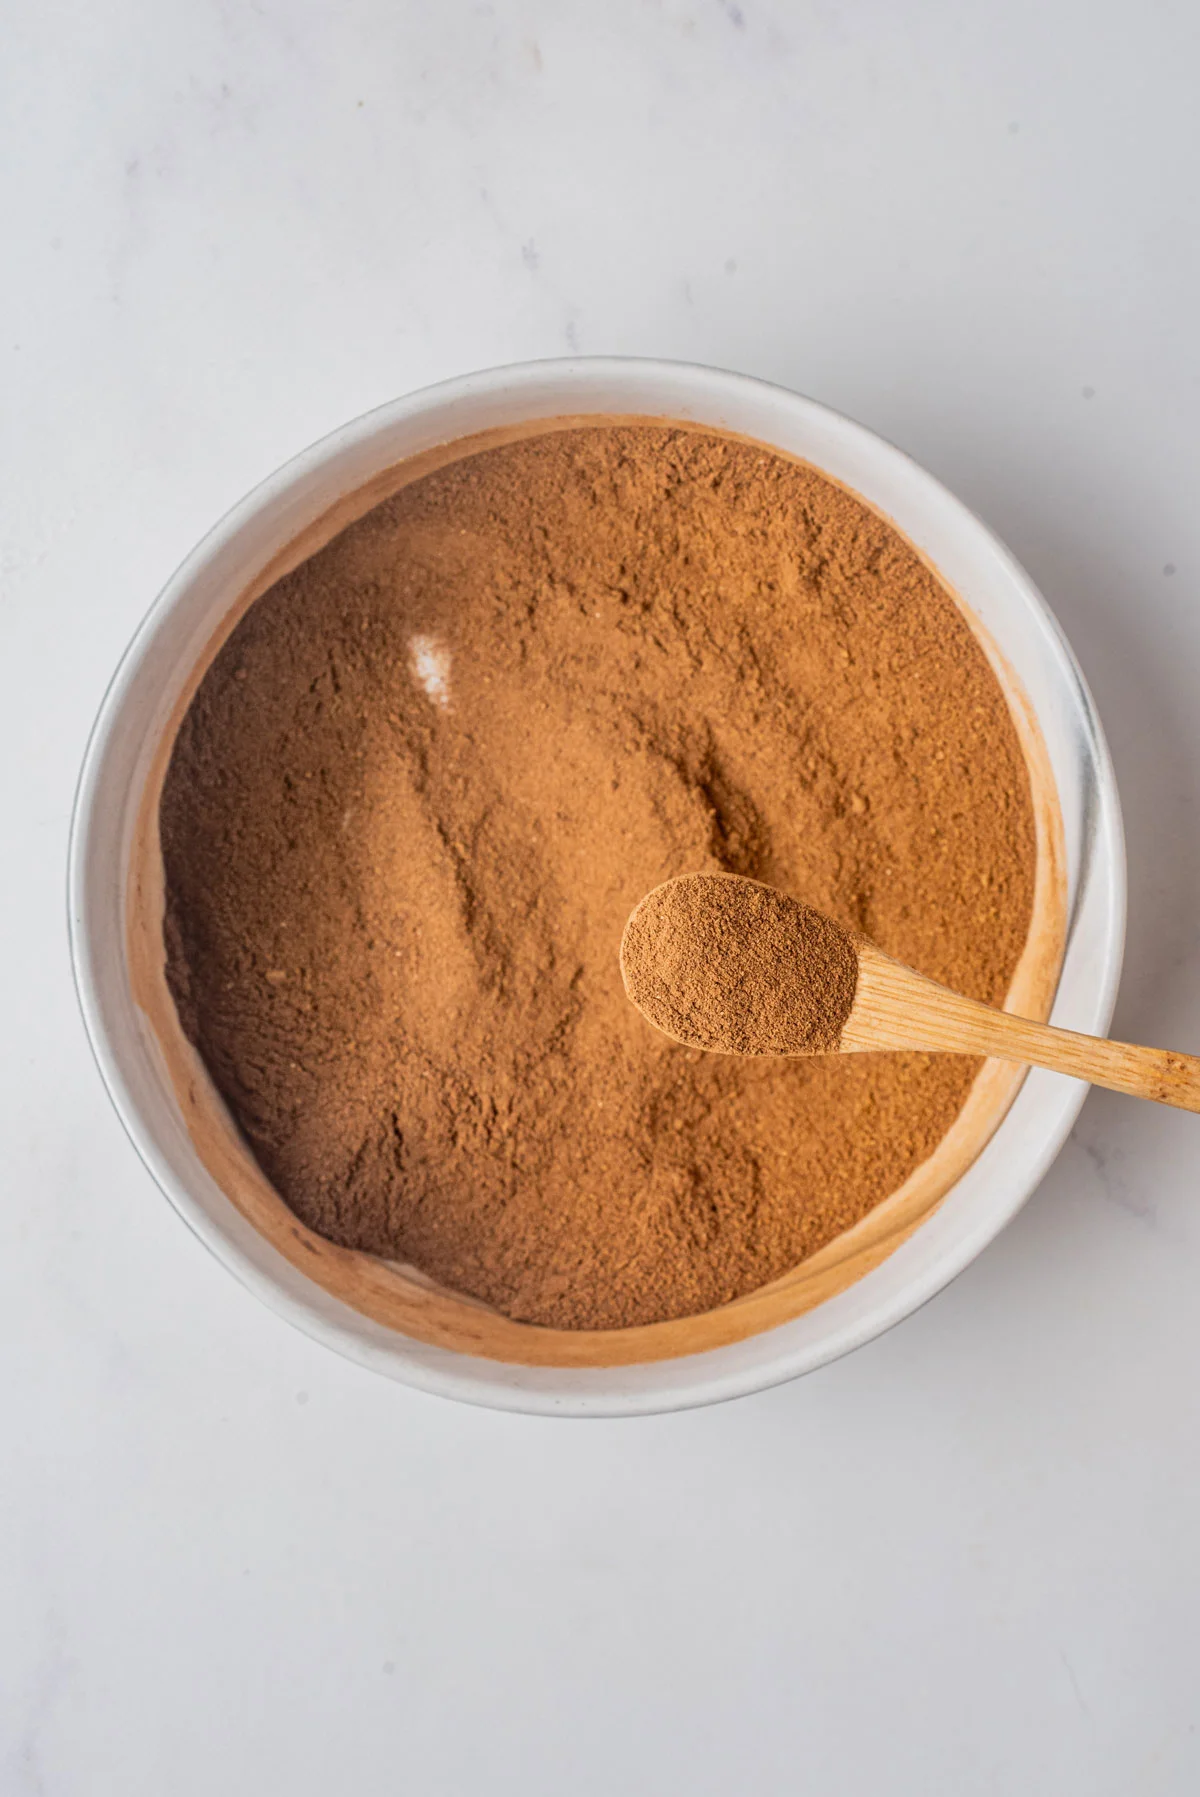 Homemade Pumpkin Pie Spice (Easy DIY Recipe) mixed together in a small white bowl with a small wood spoonful held above the bowl